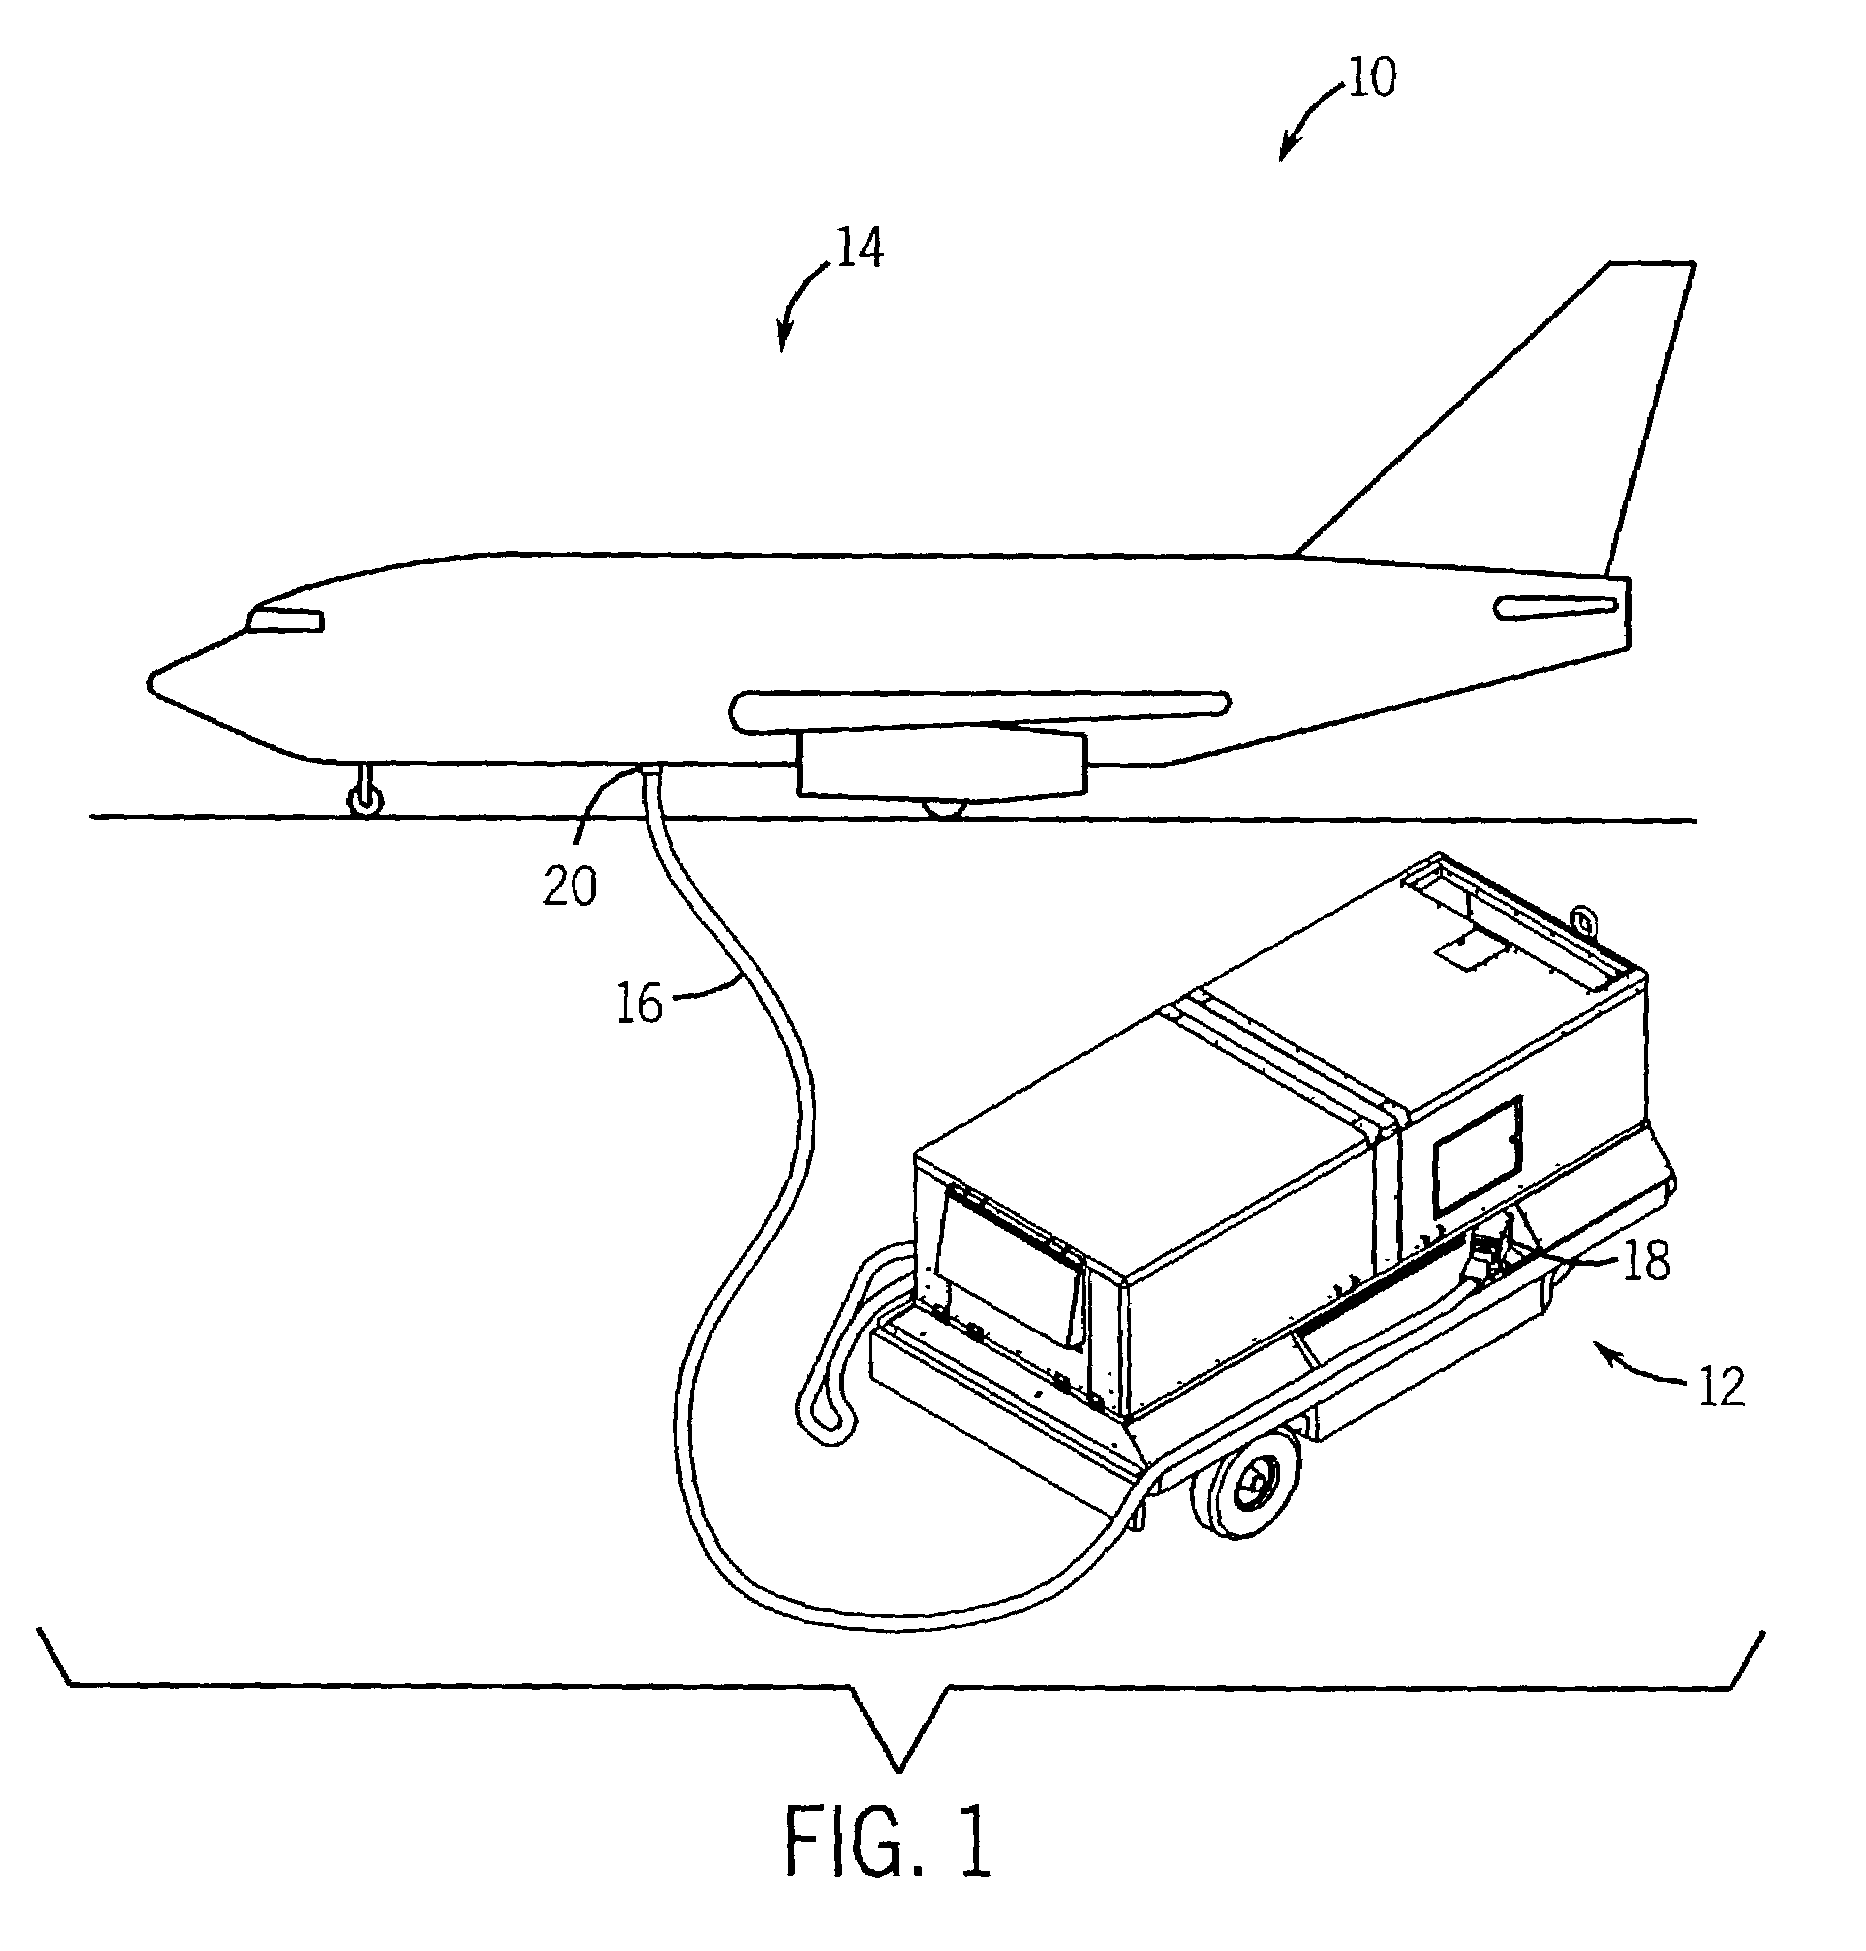 Aviation ground power unit connection system and method incorporating same